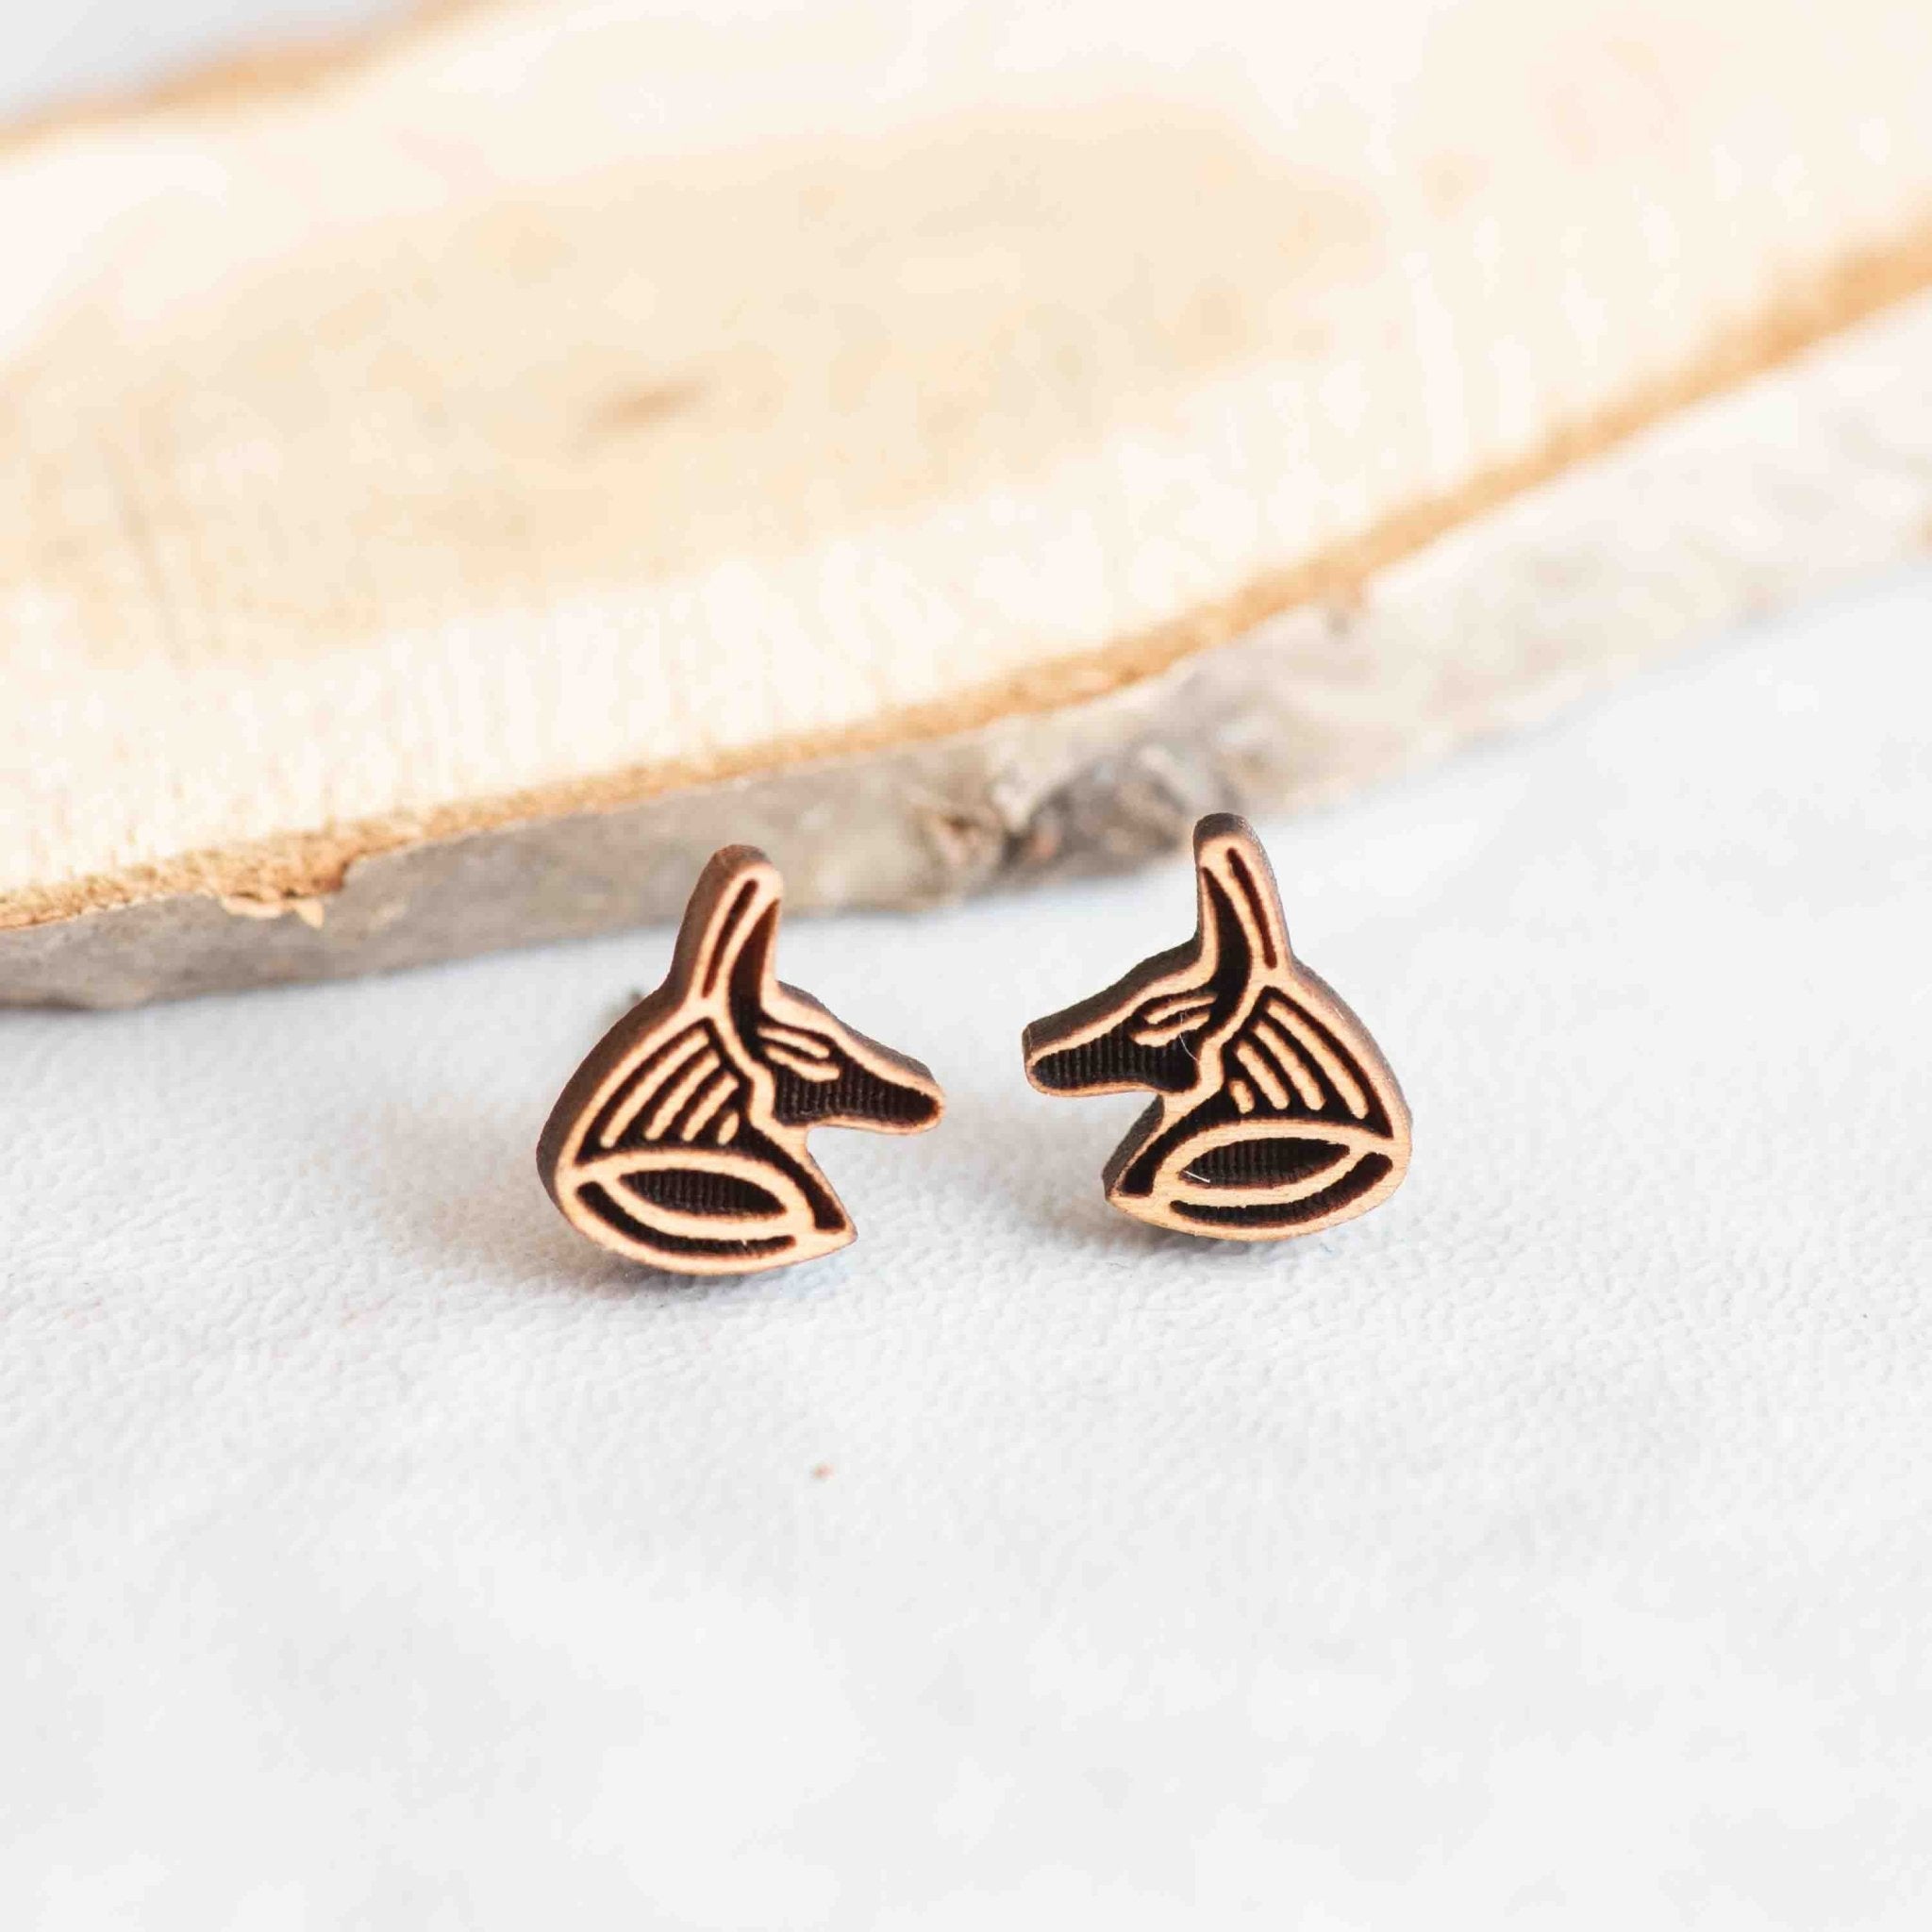 Anubis Cherry Wood Stud Earrings - ET15051 - Robin Valley Official Store